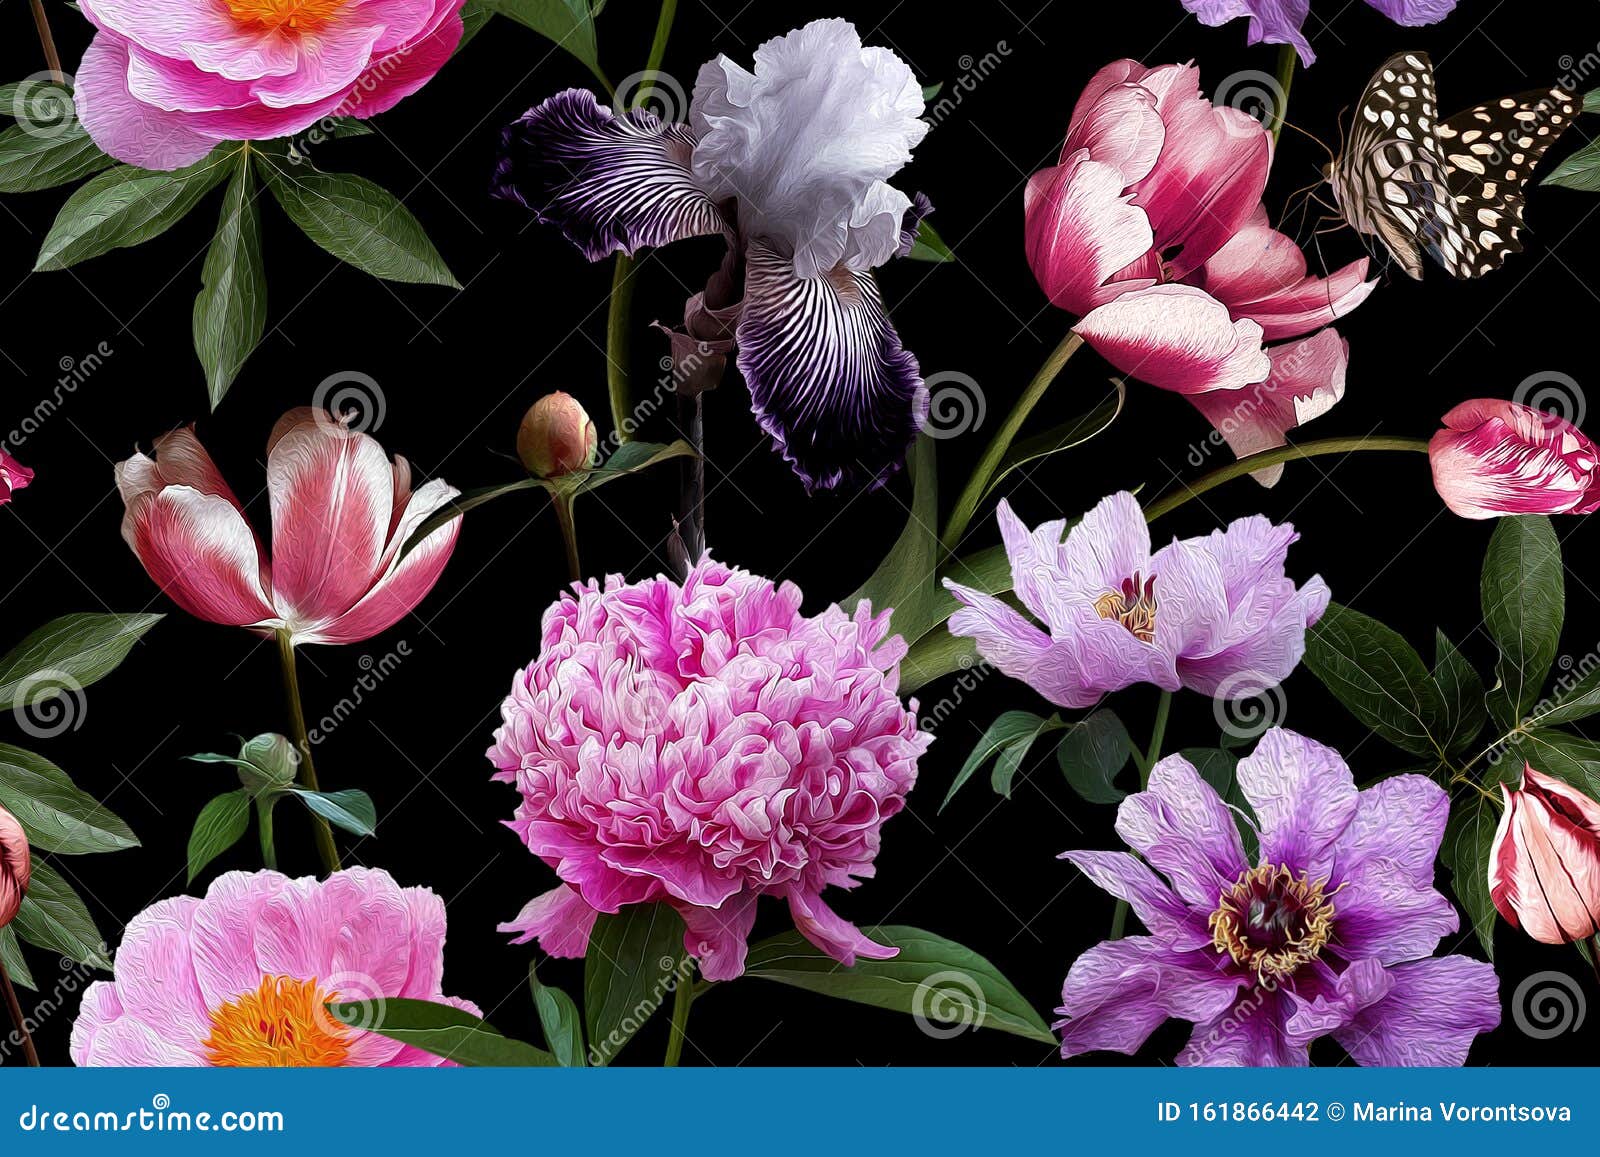 325,256 Flowers Wallpaper Stock Photos - Free & Royalty-Free Stock Photos  from Dreamstime